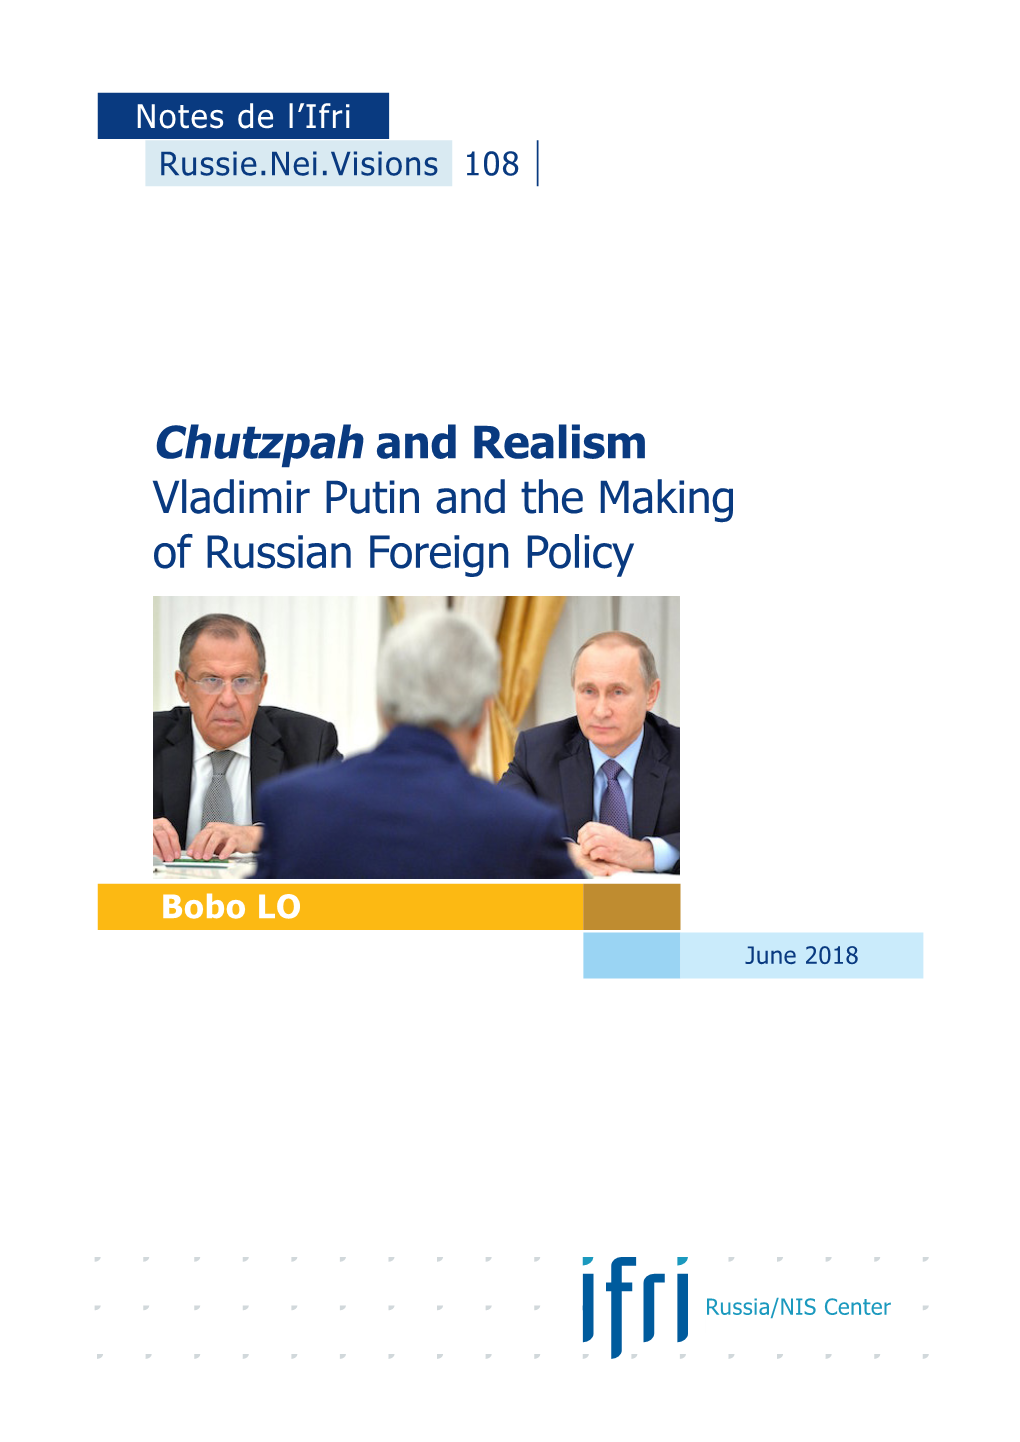 Chutzpah and Realism: Vladimir Putin and the Making of Russian Foreign Policy”, Russie.Nei.Visions, No